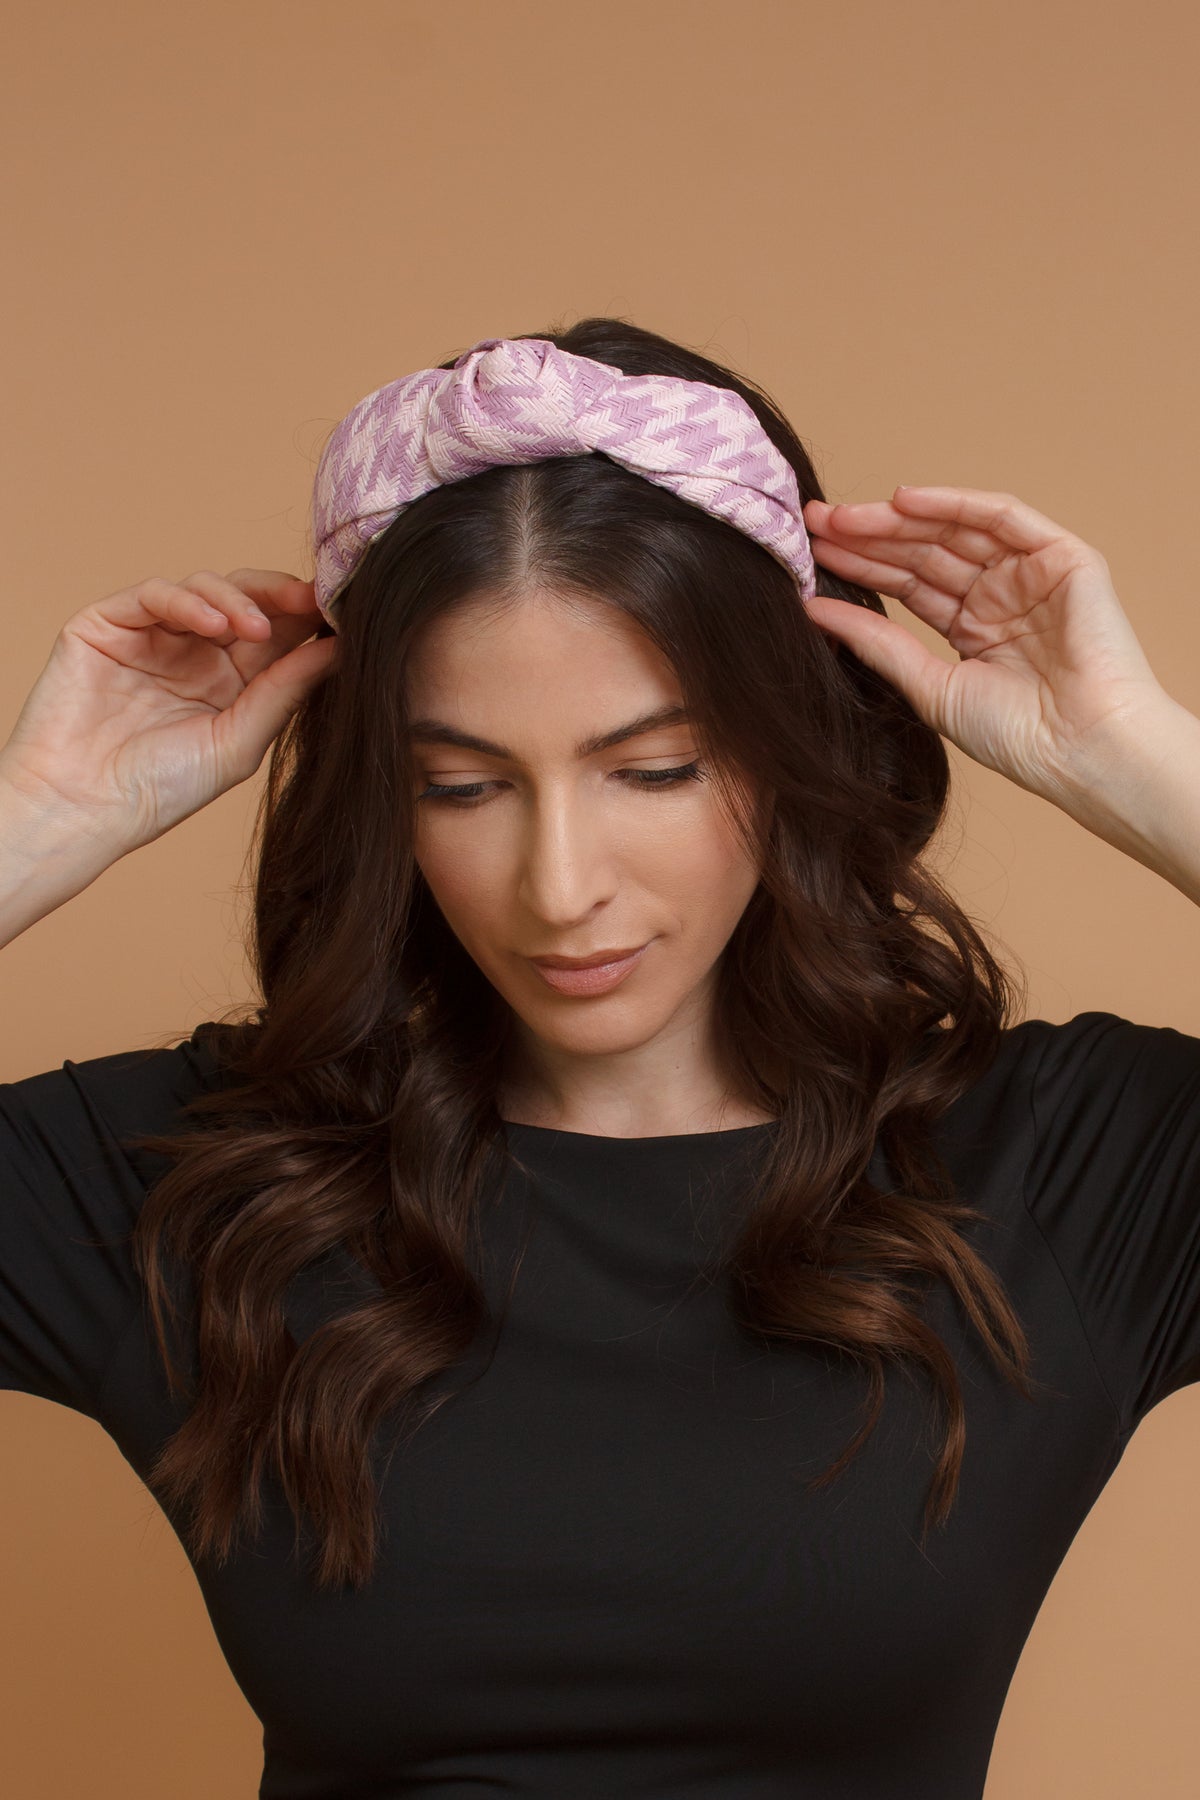 Woven straw headband with knot top, in lilac.